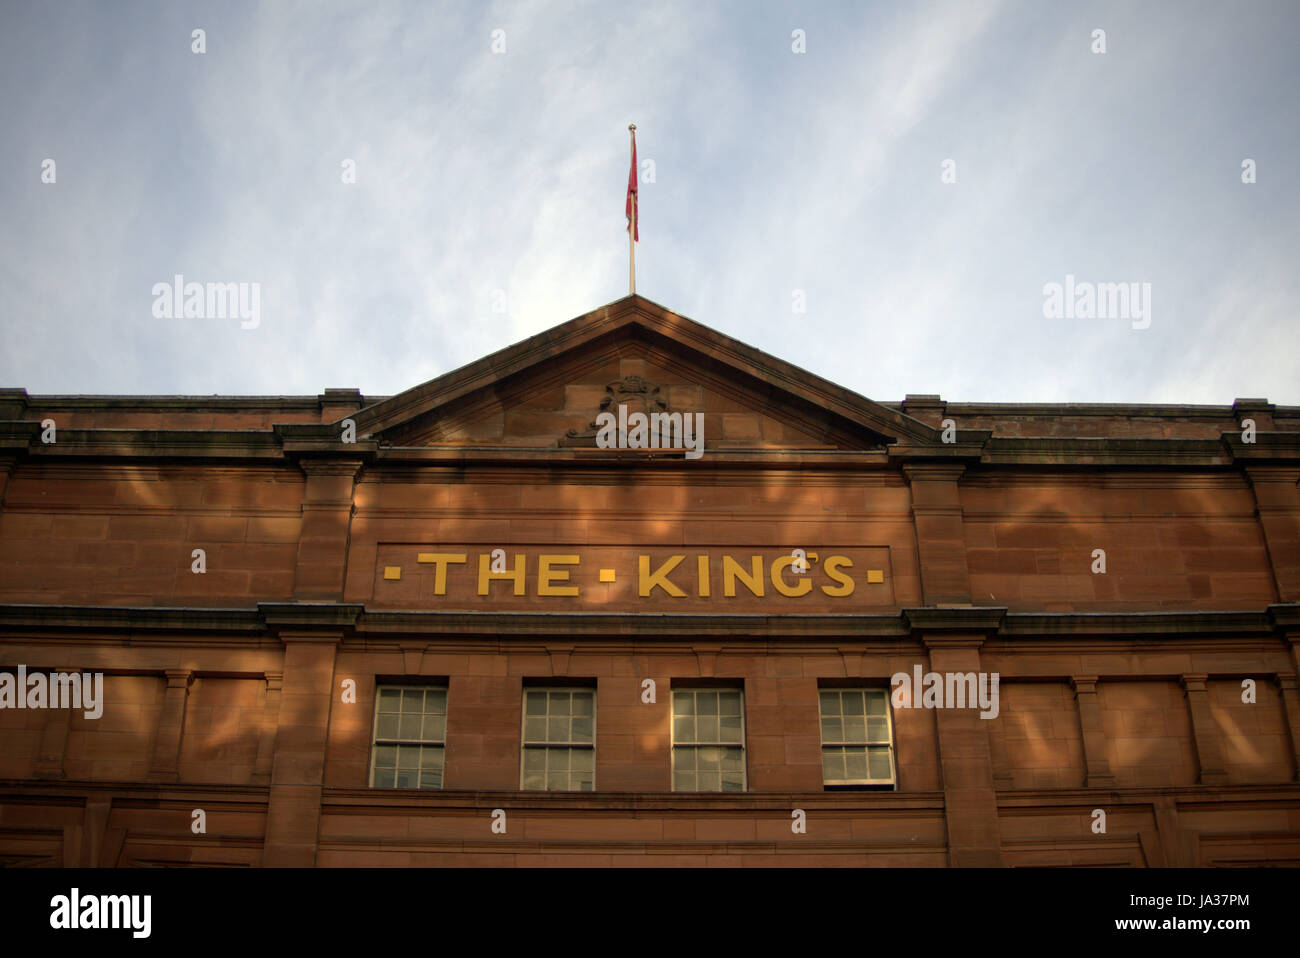 King's Theatre Glasgow building with losal name 'The Kings' Stock Photo